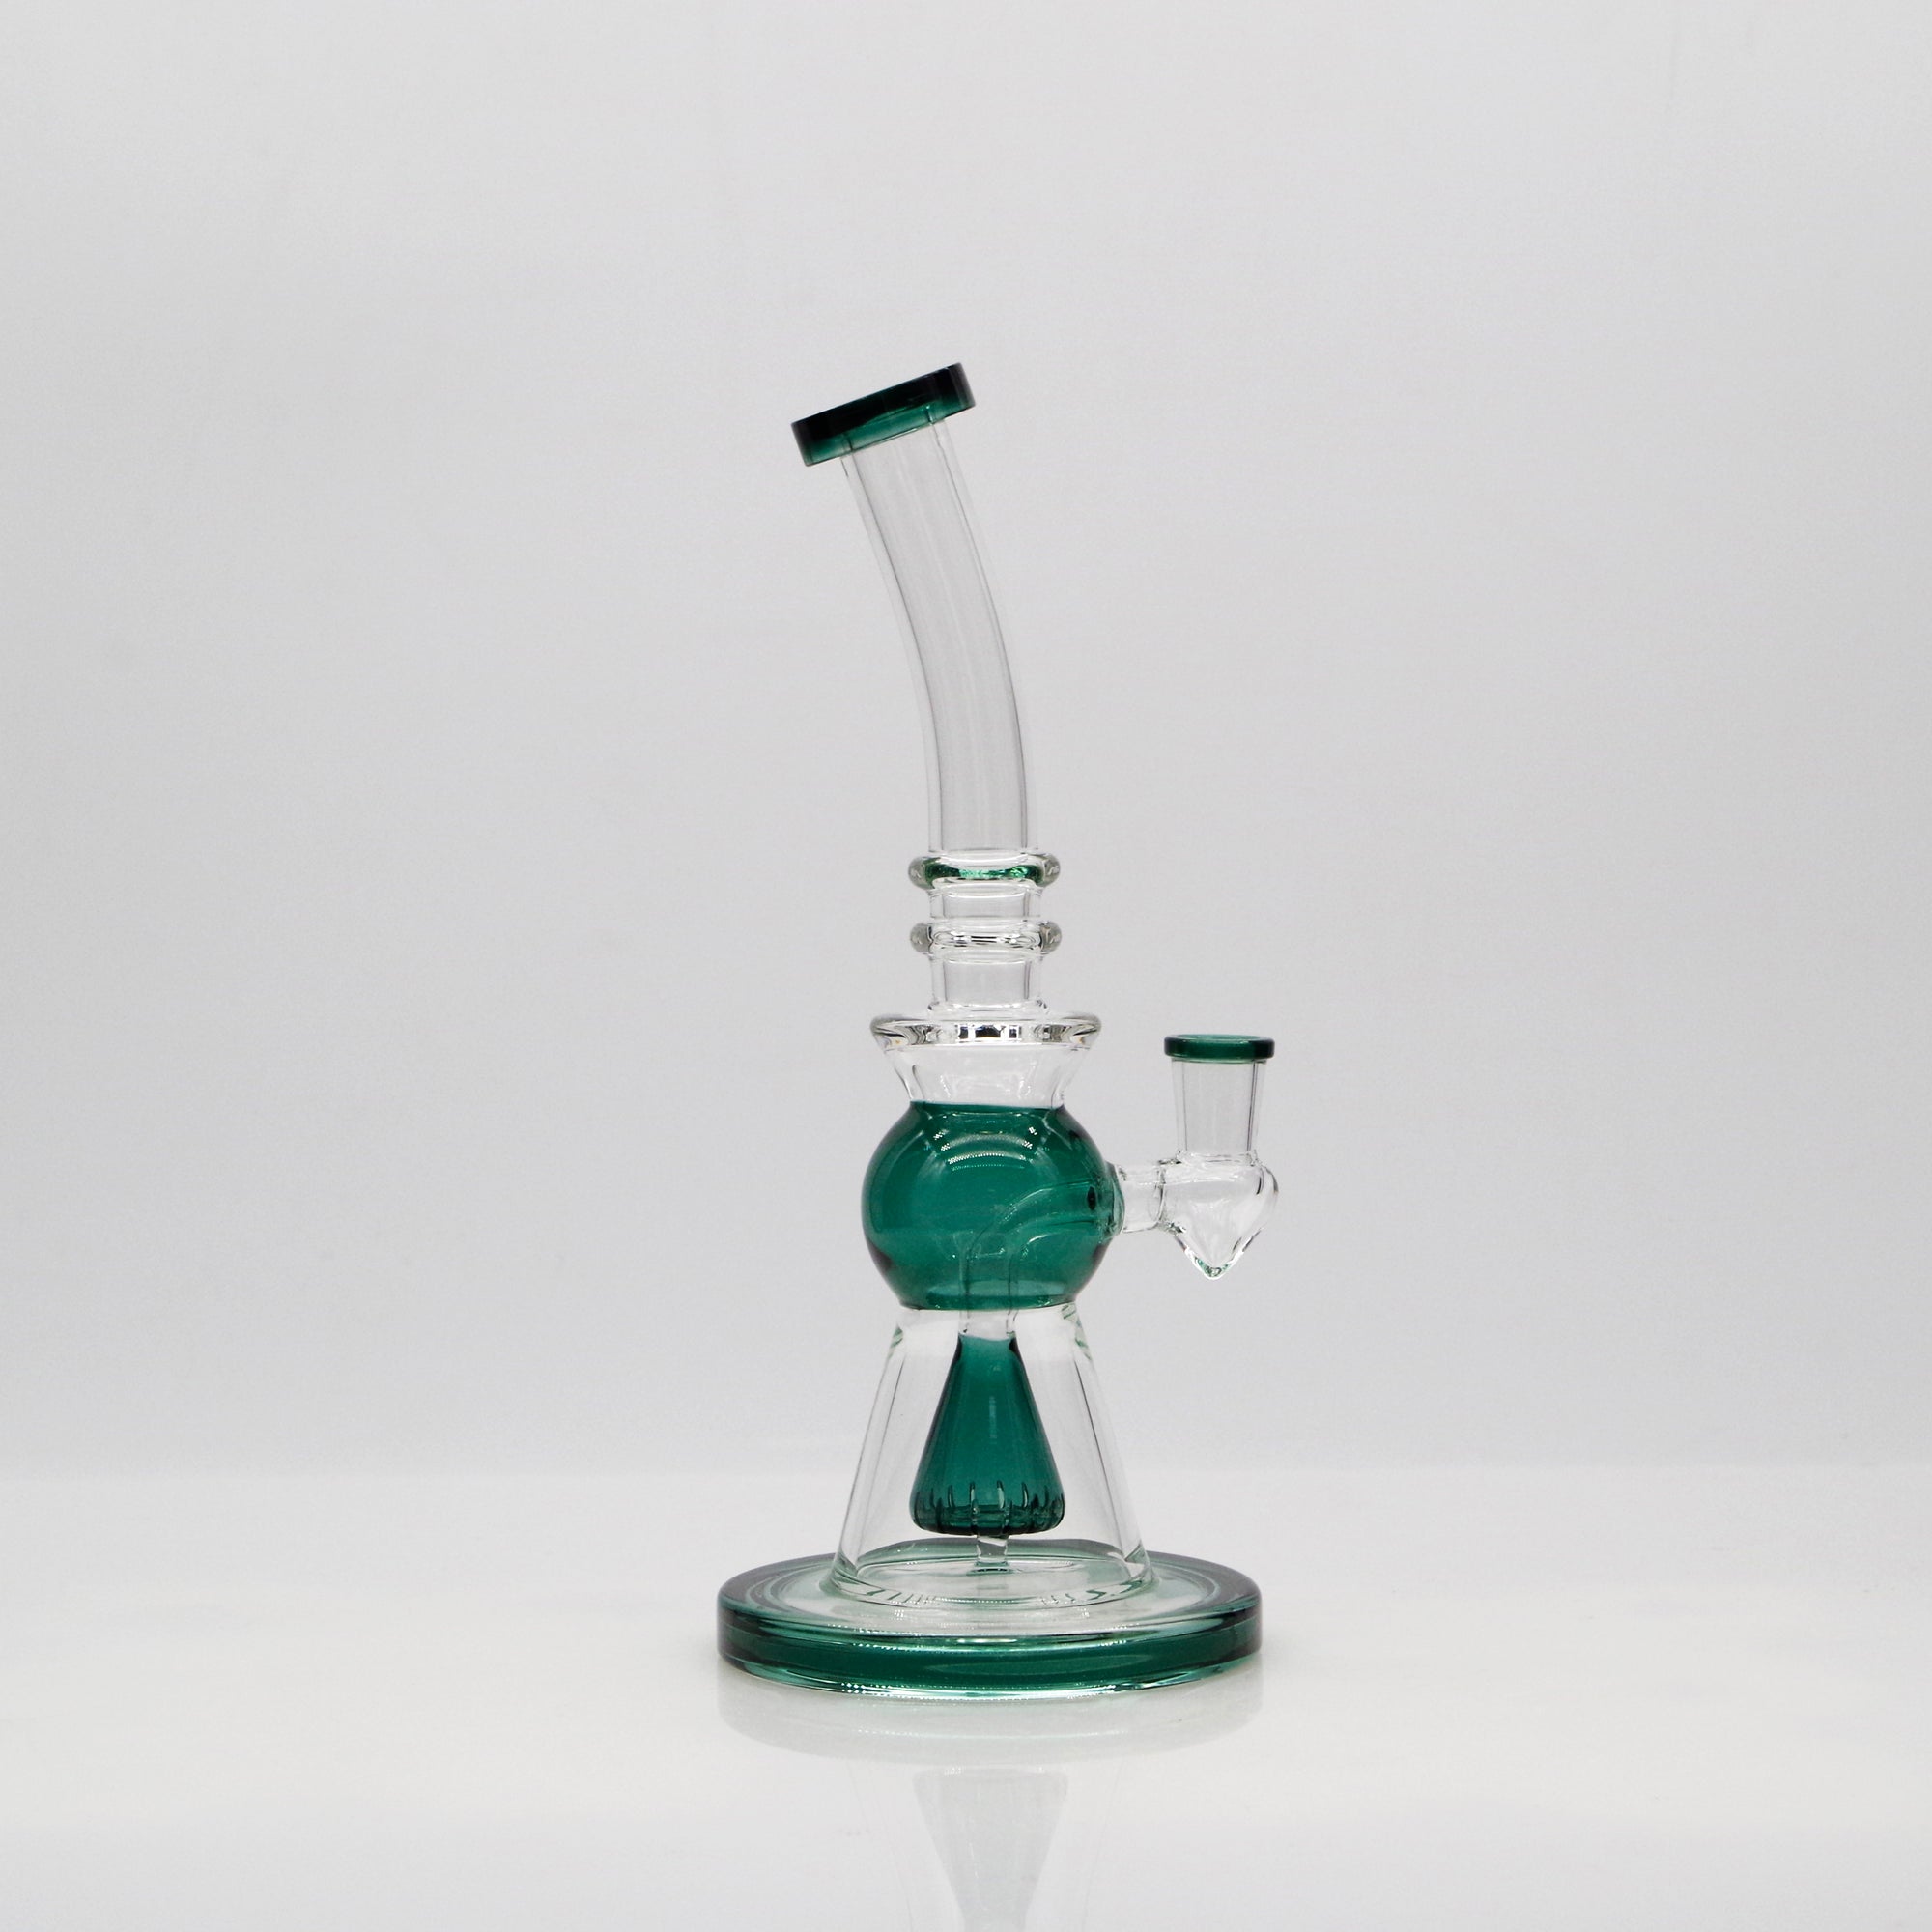 Colored Ball Rig (Online Only) - Aqua